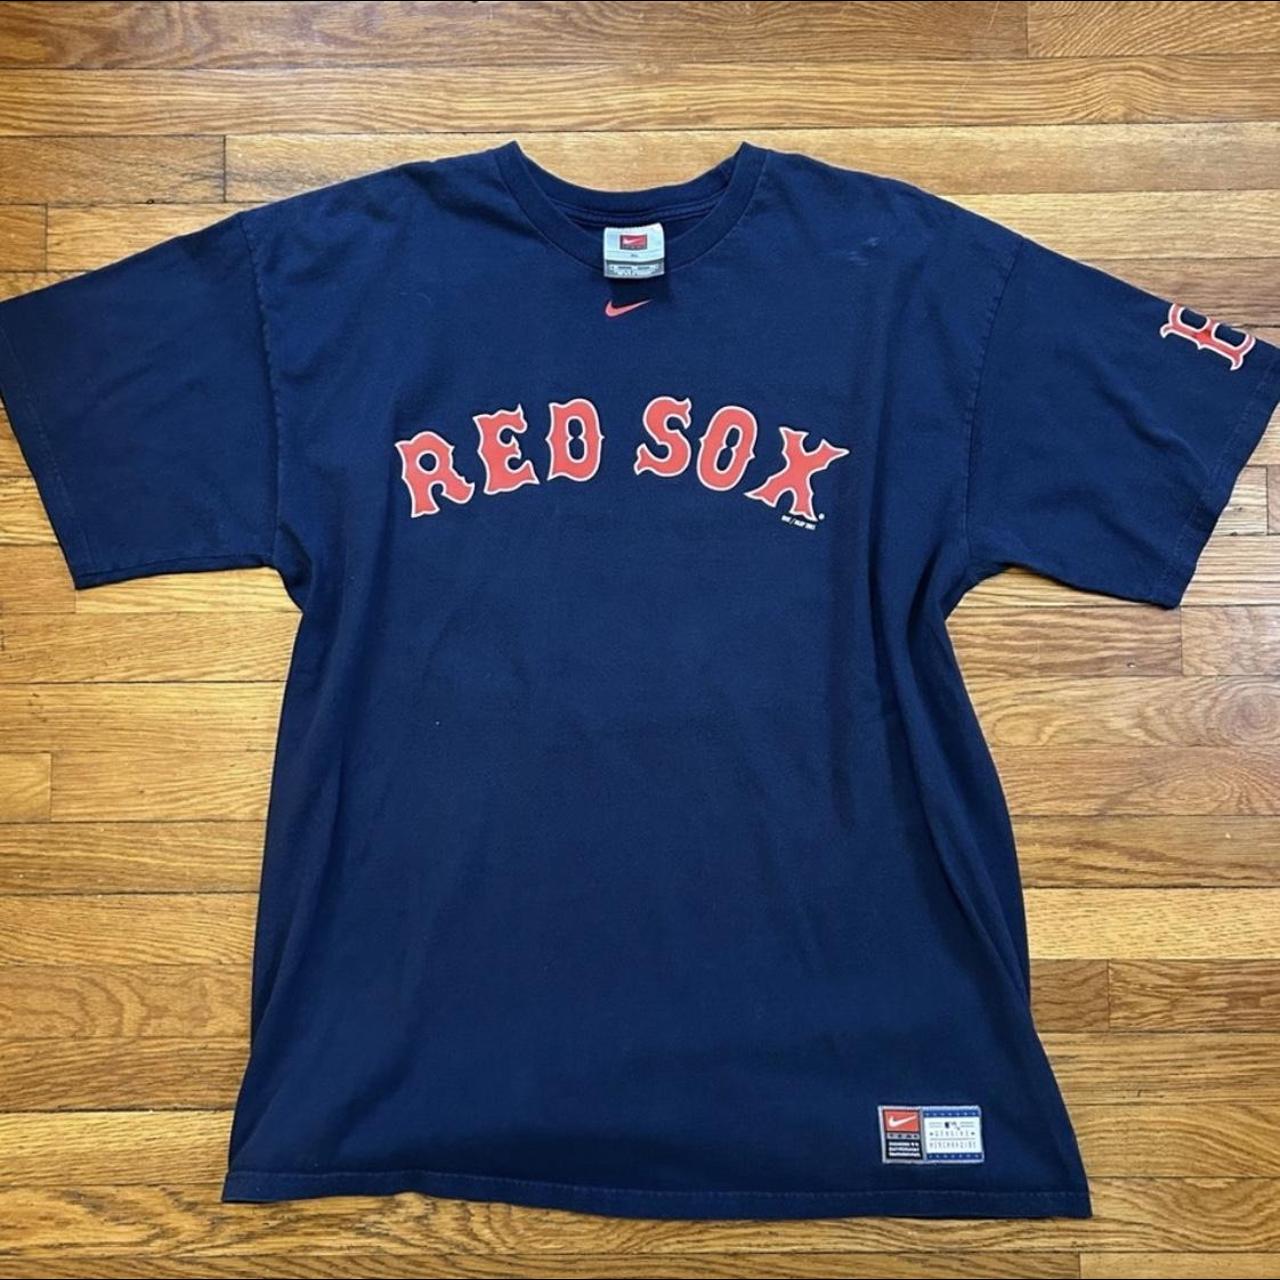 Vintage Nike MLB Red Sox tee, size: XL